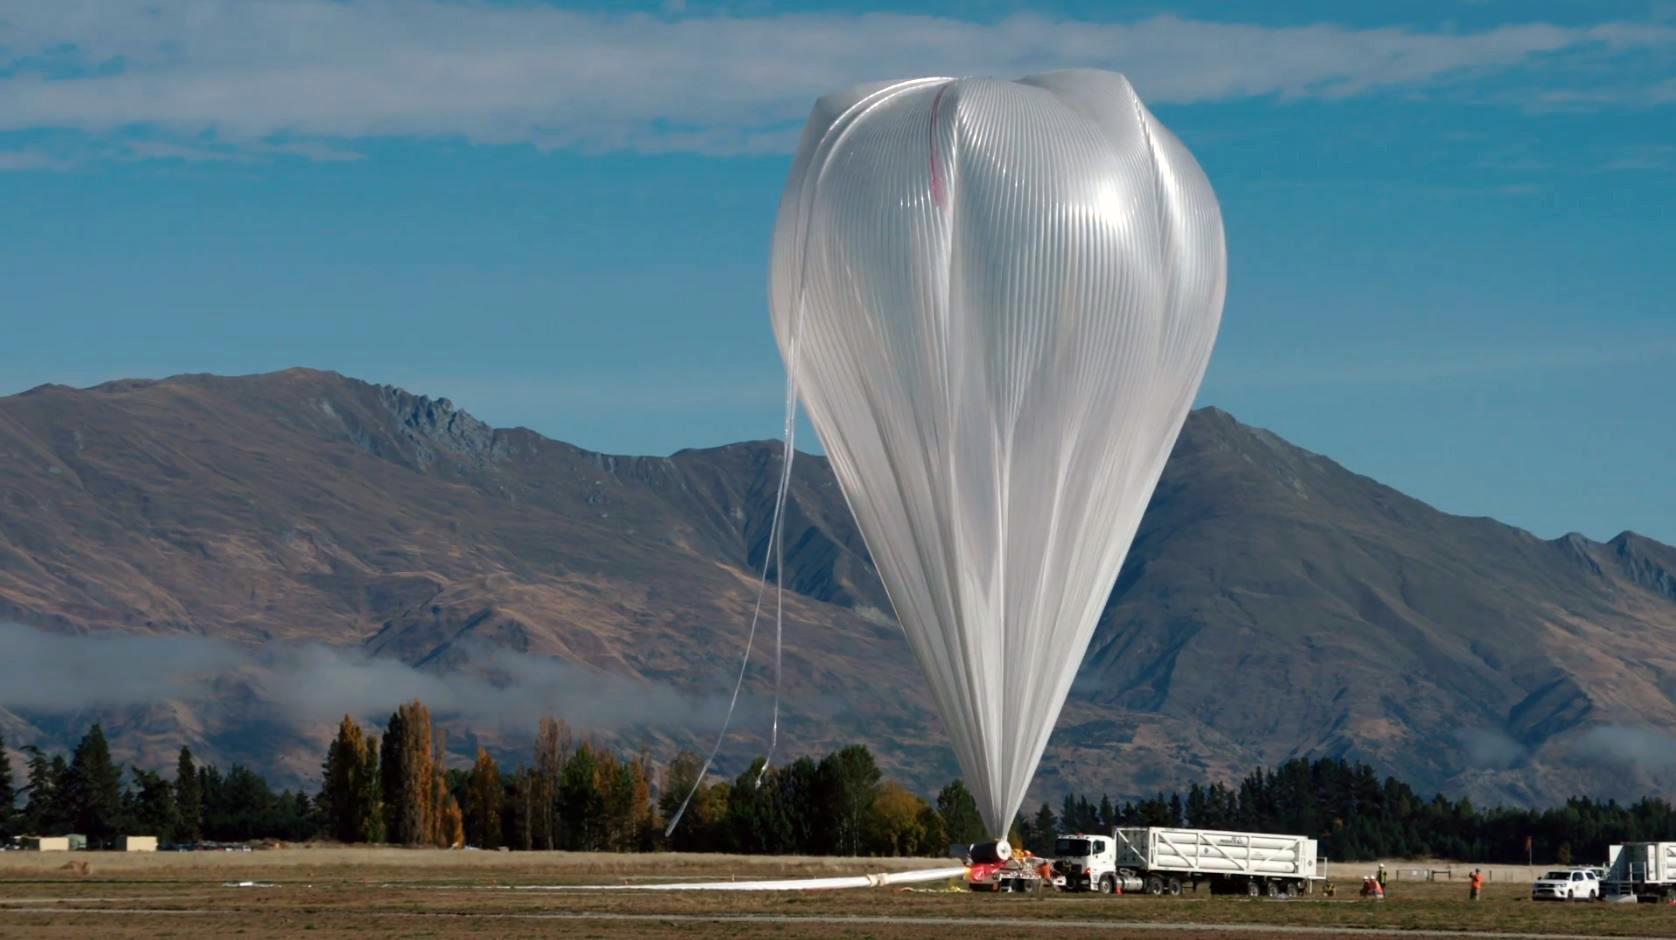 A team led by University of Chicago professor Angela Olinto will use a NASA super pressure balloon to study mysterious cosmic rays coming from beyond our own galaxy. (Angela Olinto / University of Chicago)